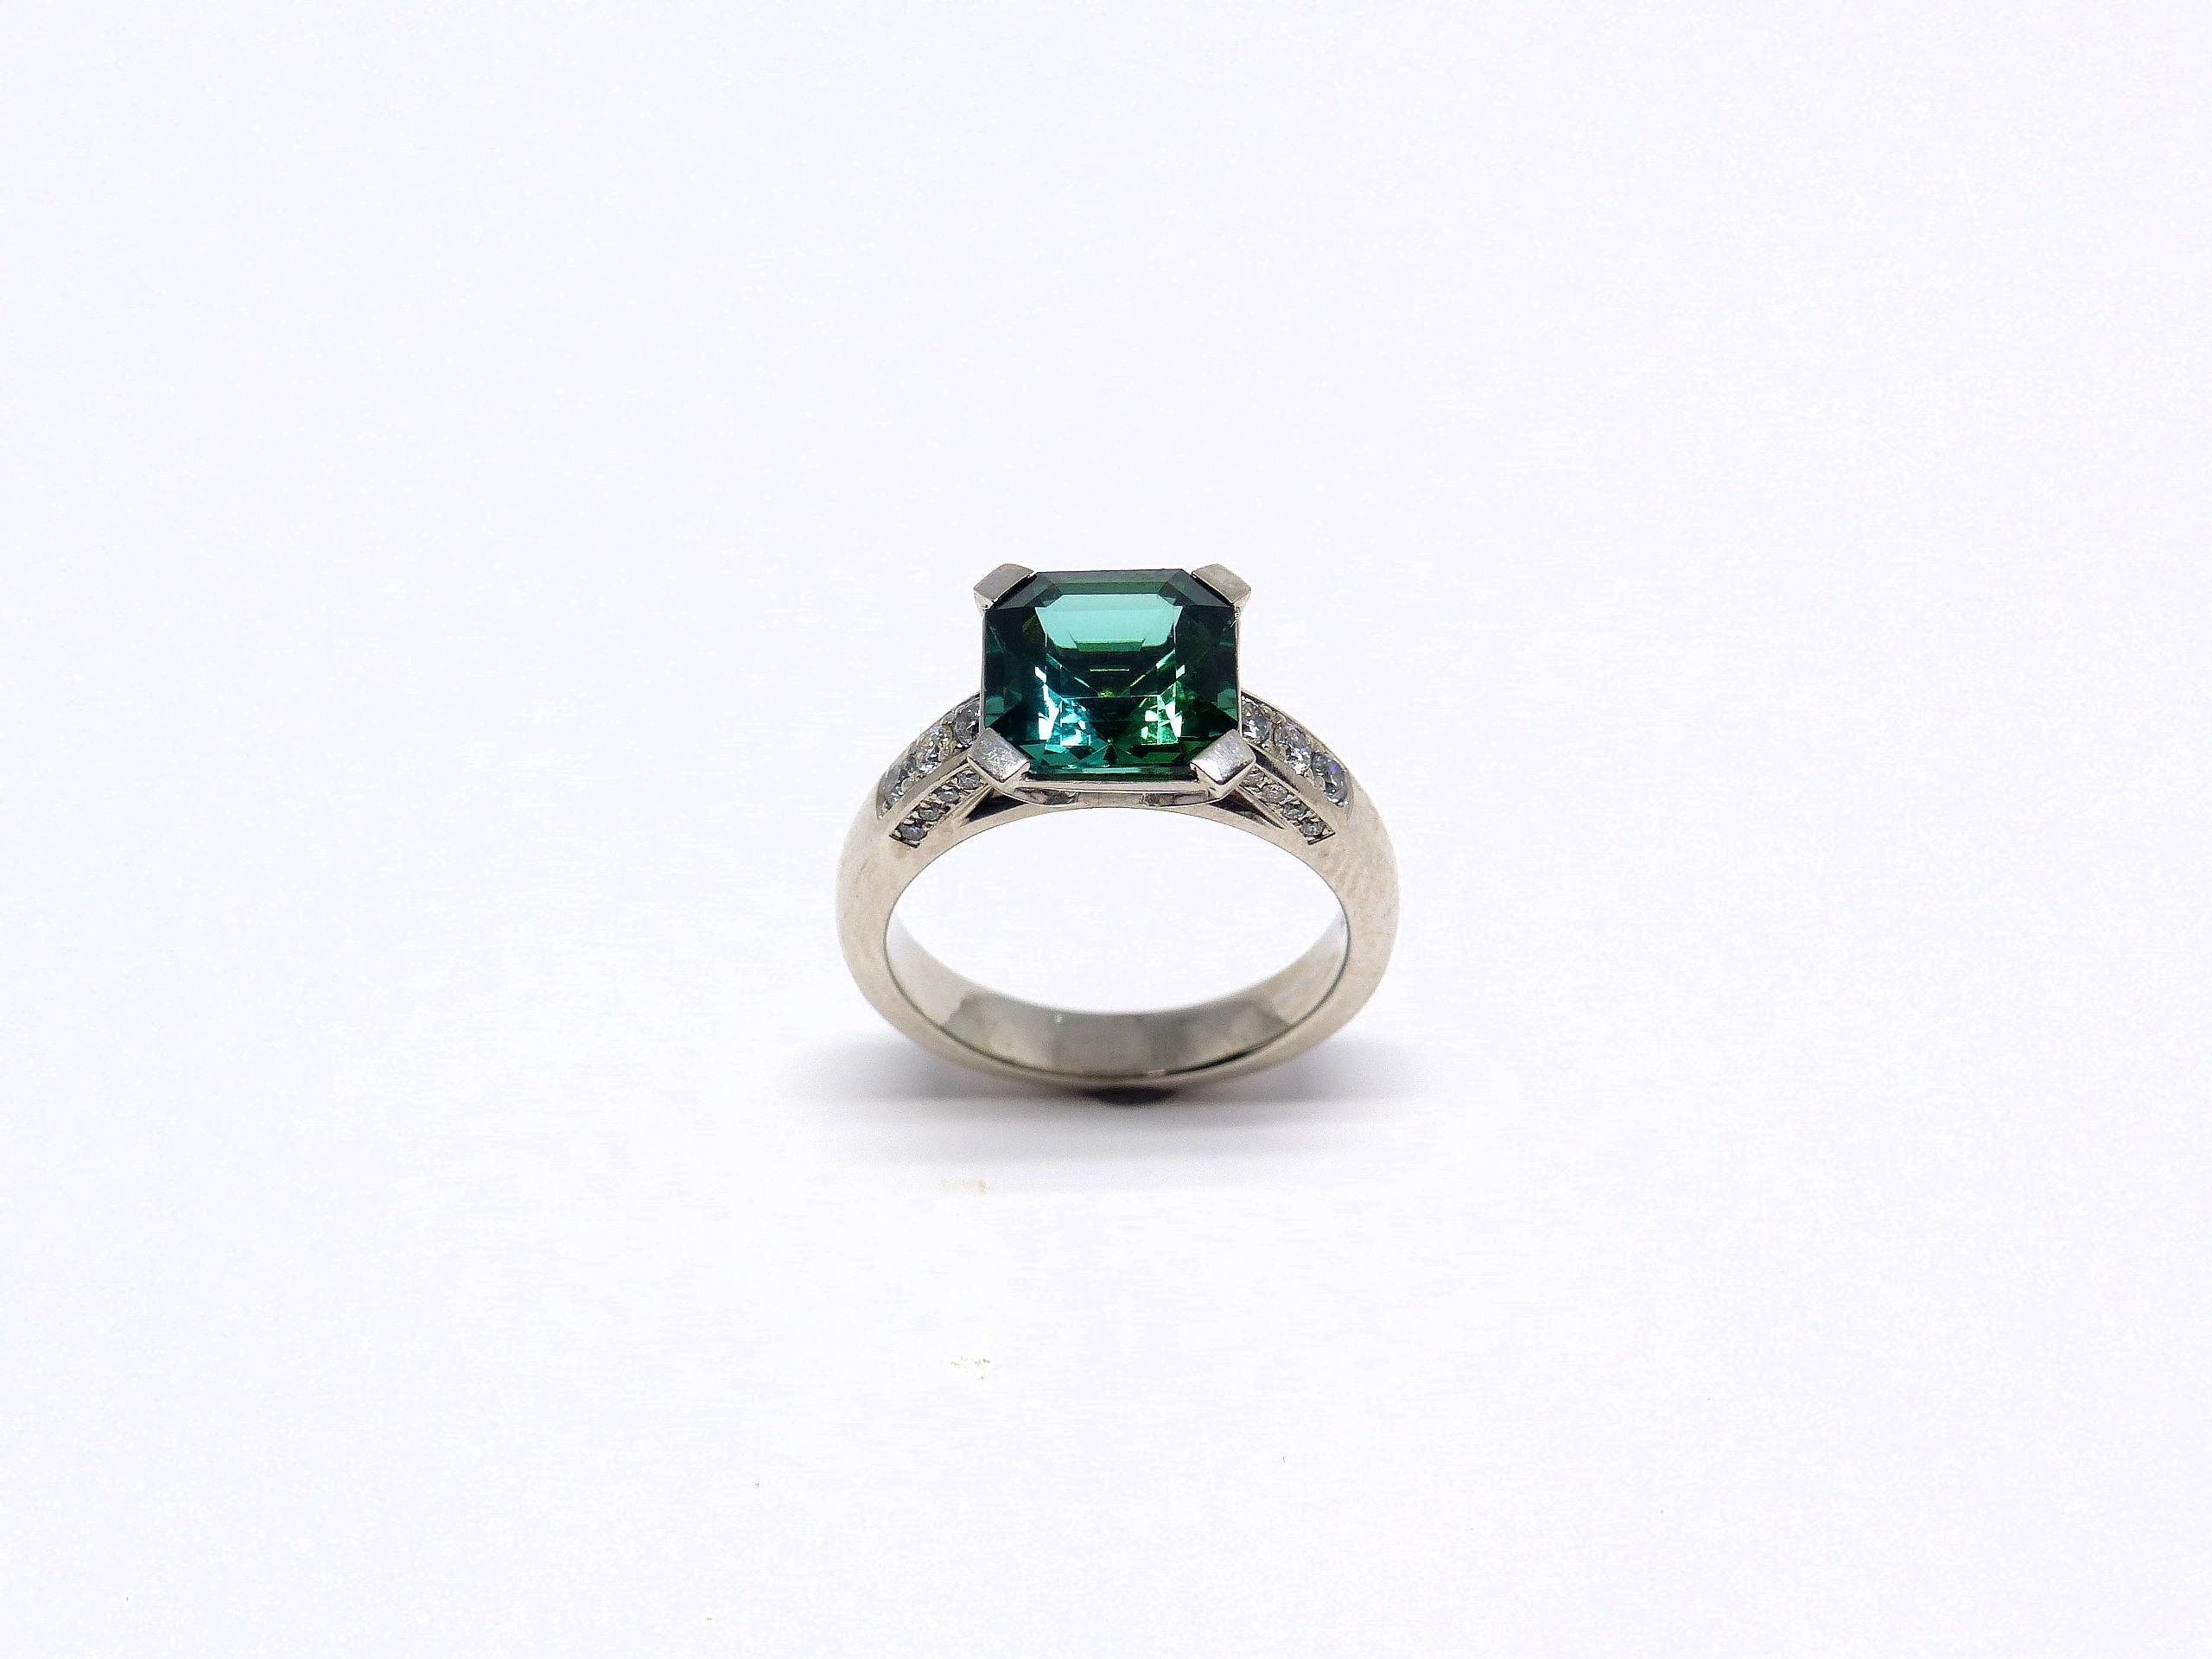 green tourmaline rings for sale